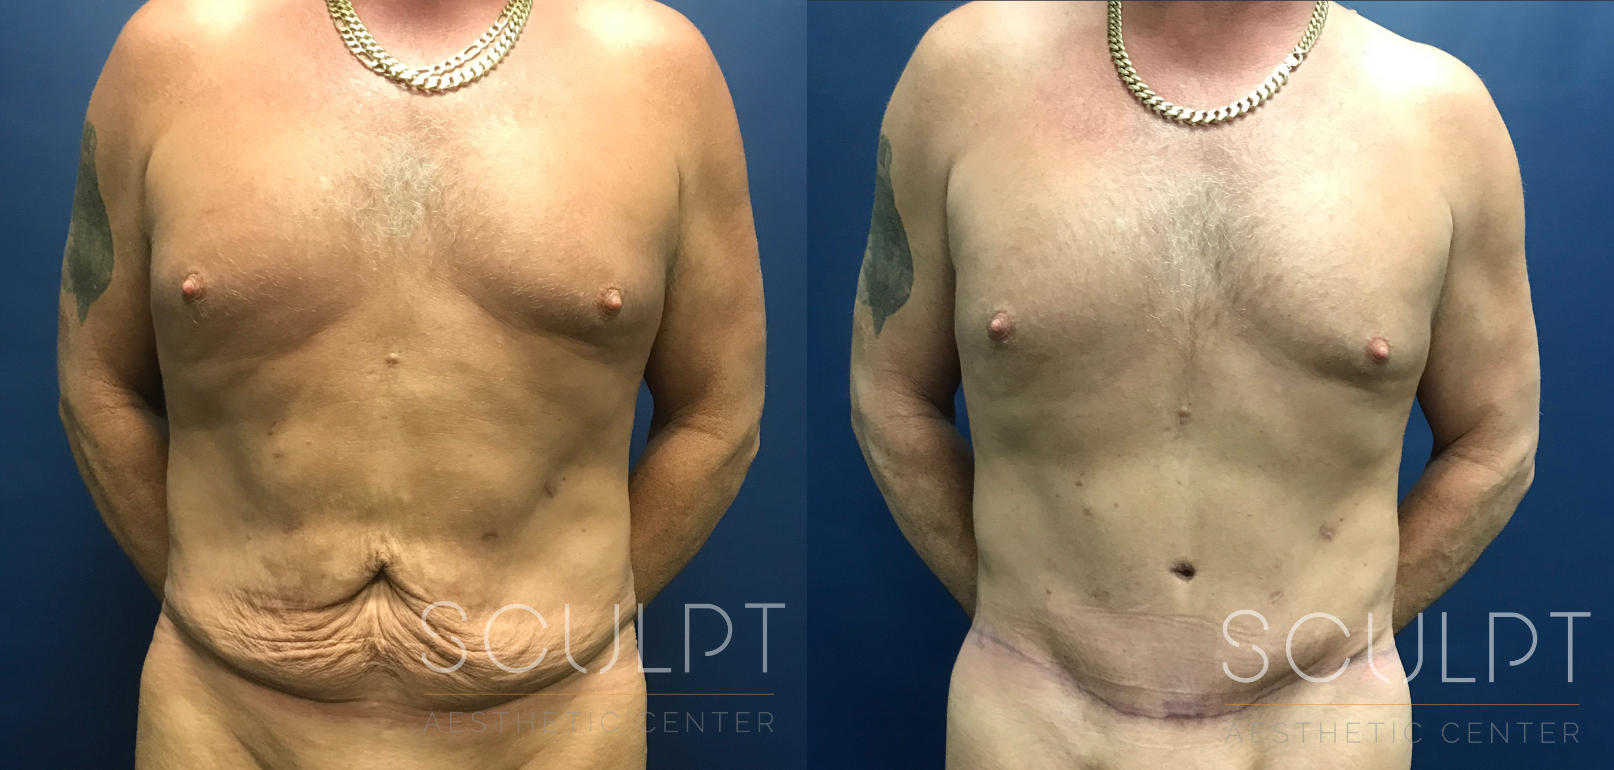 After Weight Loss Fitness Surgery Before and After Photo by Sculpt Aesthetic Center in Frisco, TX